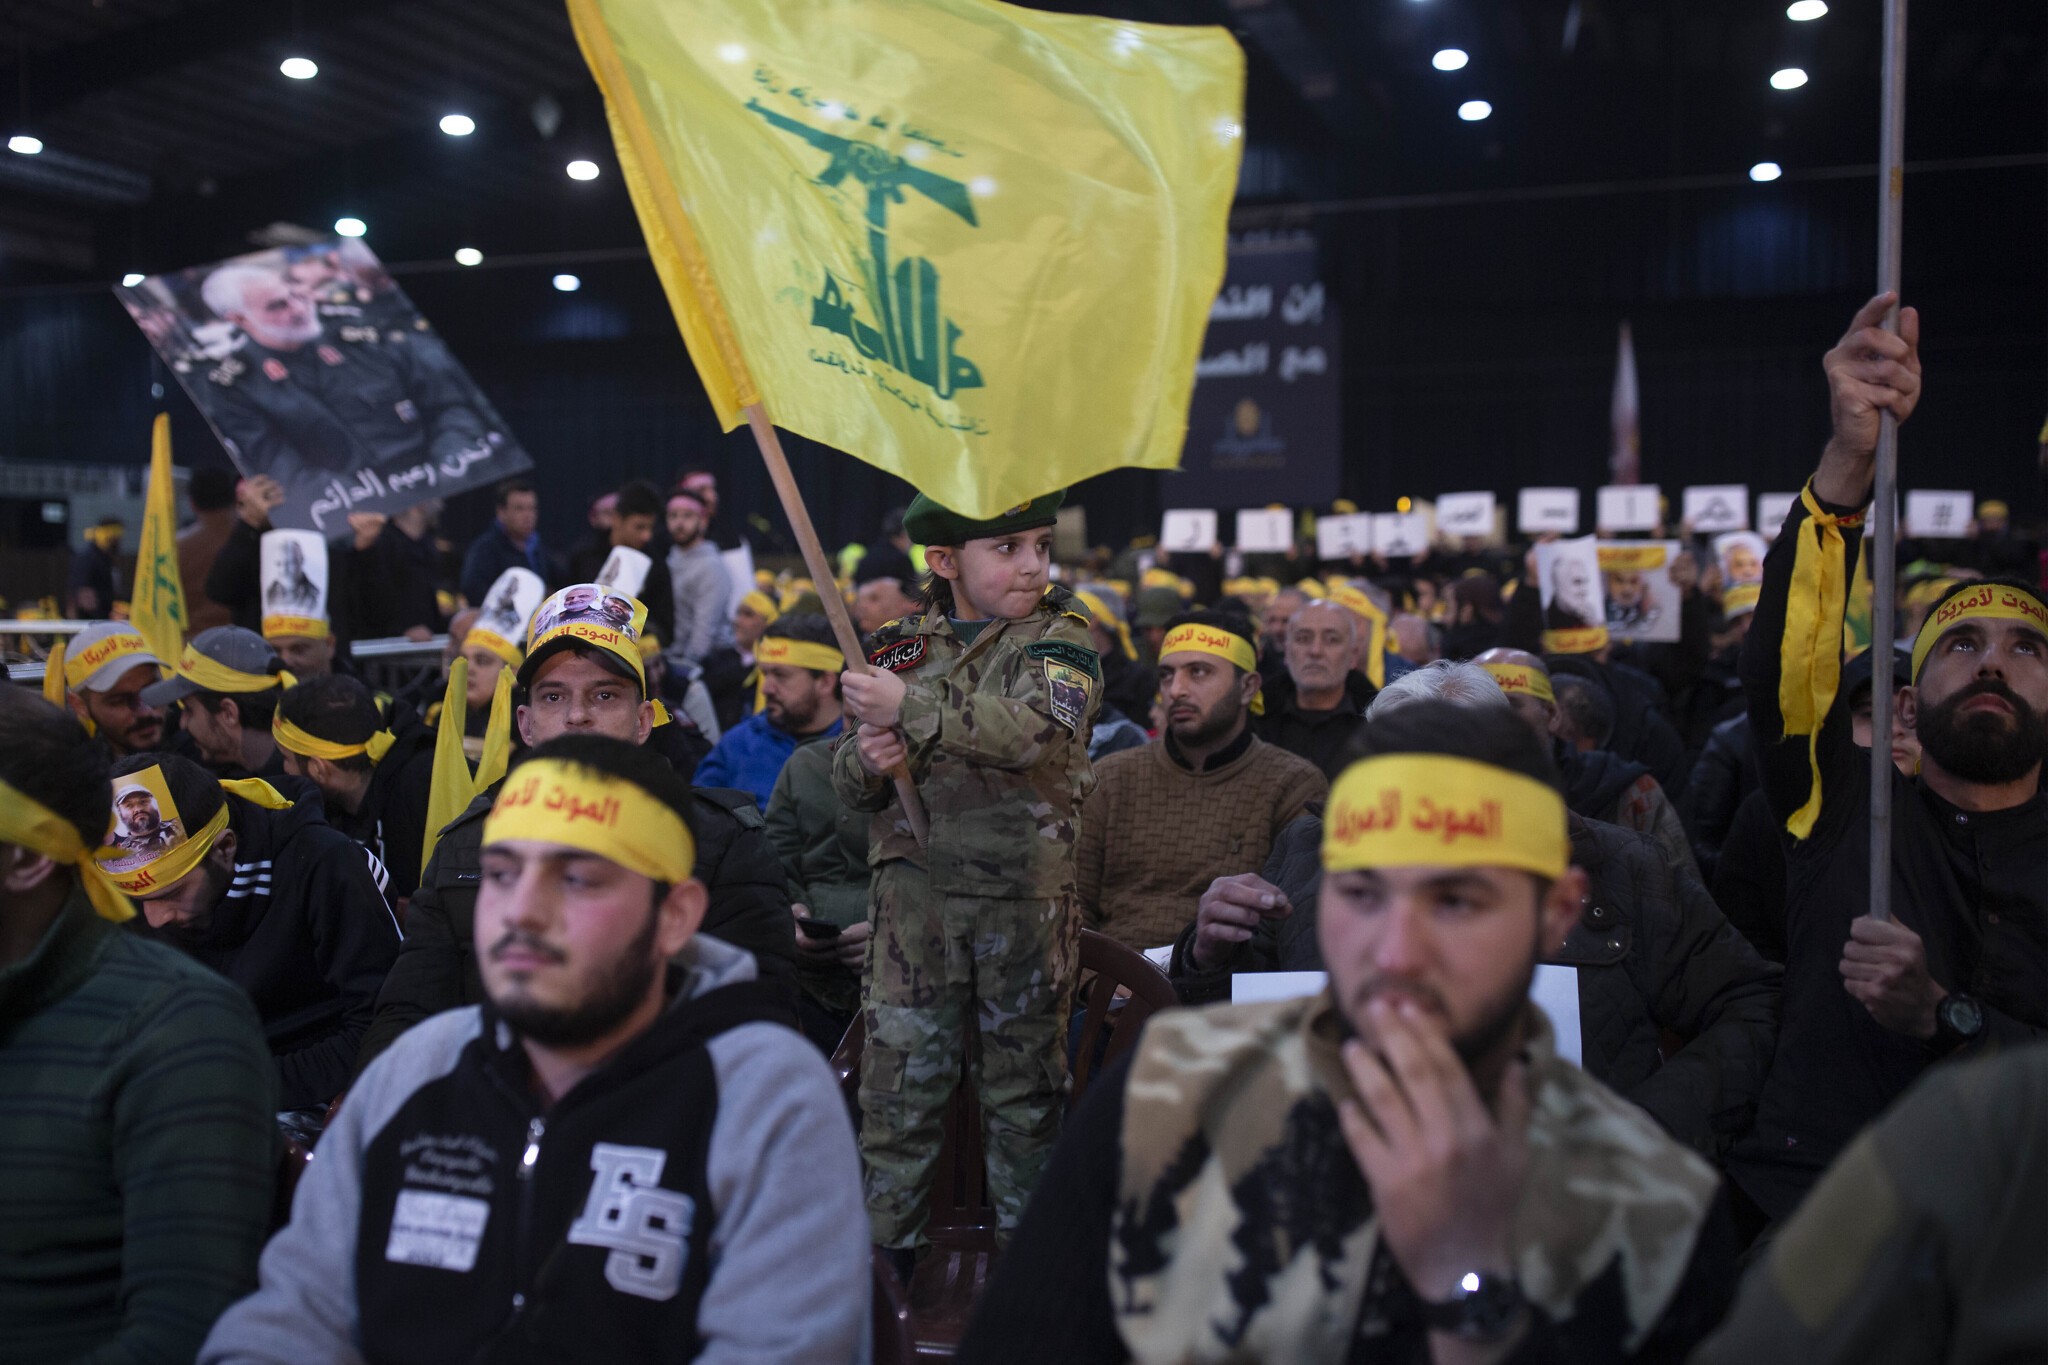 Mossad informs Germany about Hezbollah activities